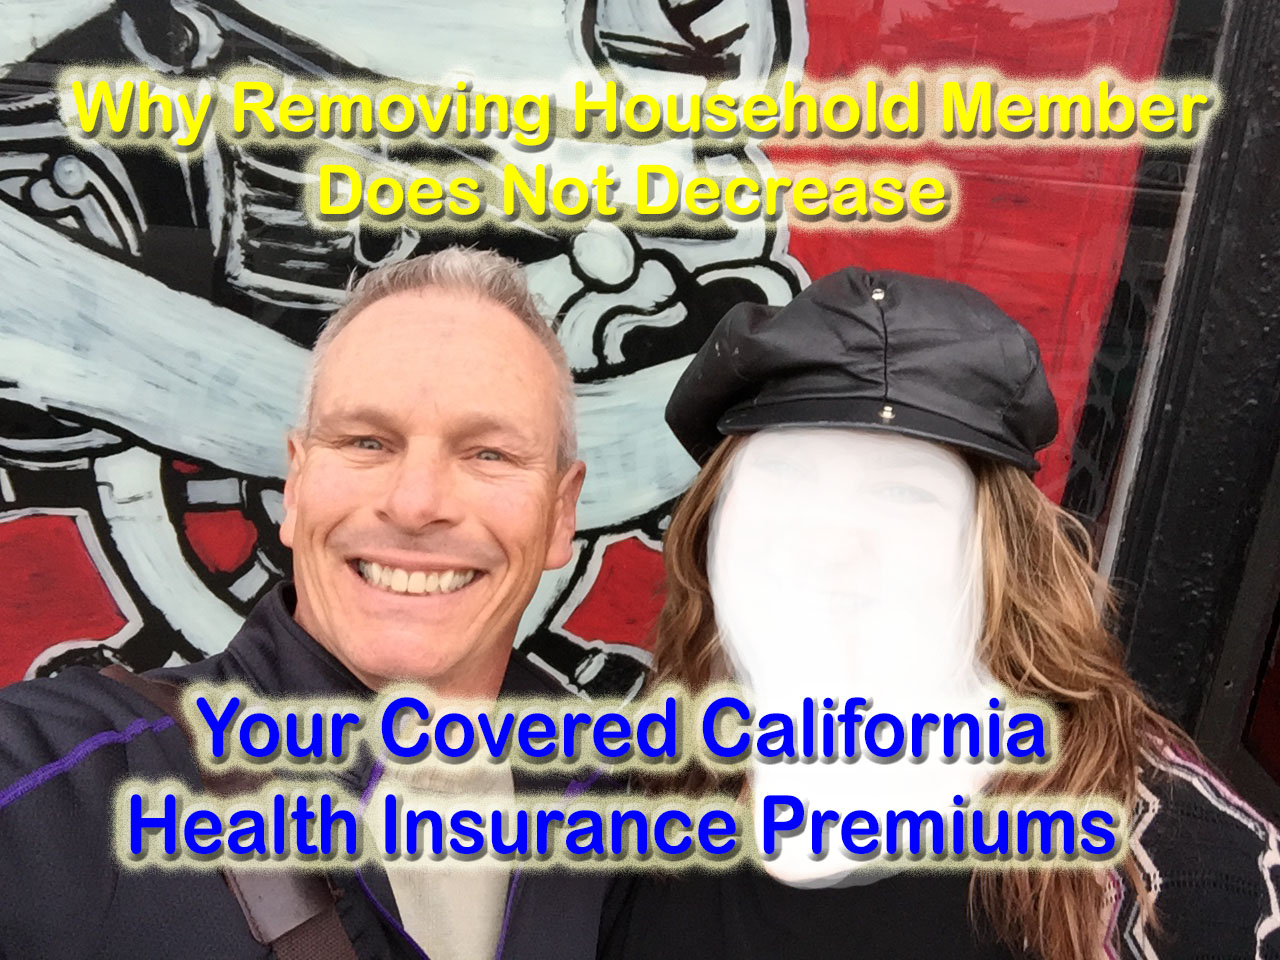 Removing a household member from the Covered California health plan will not proportionally reduce the subsidized health insurance premium.